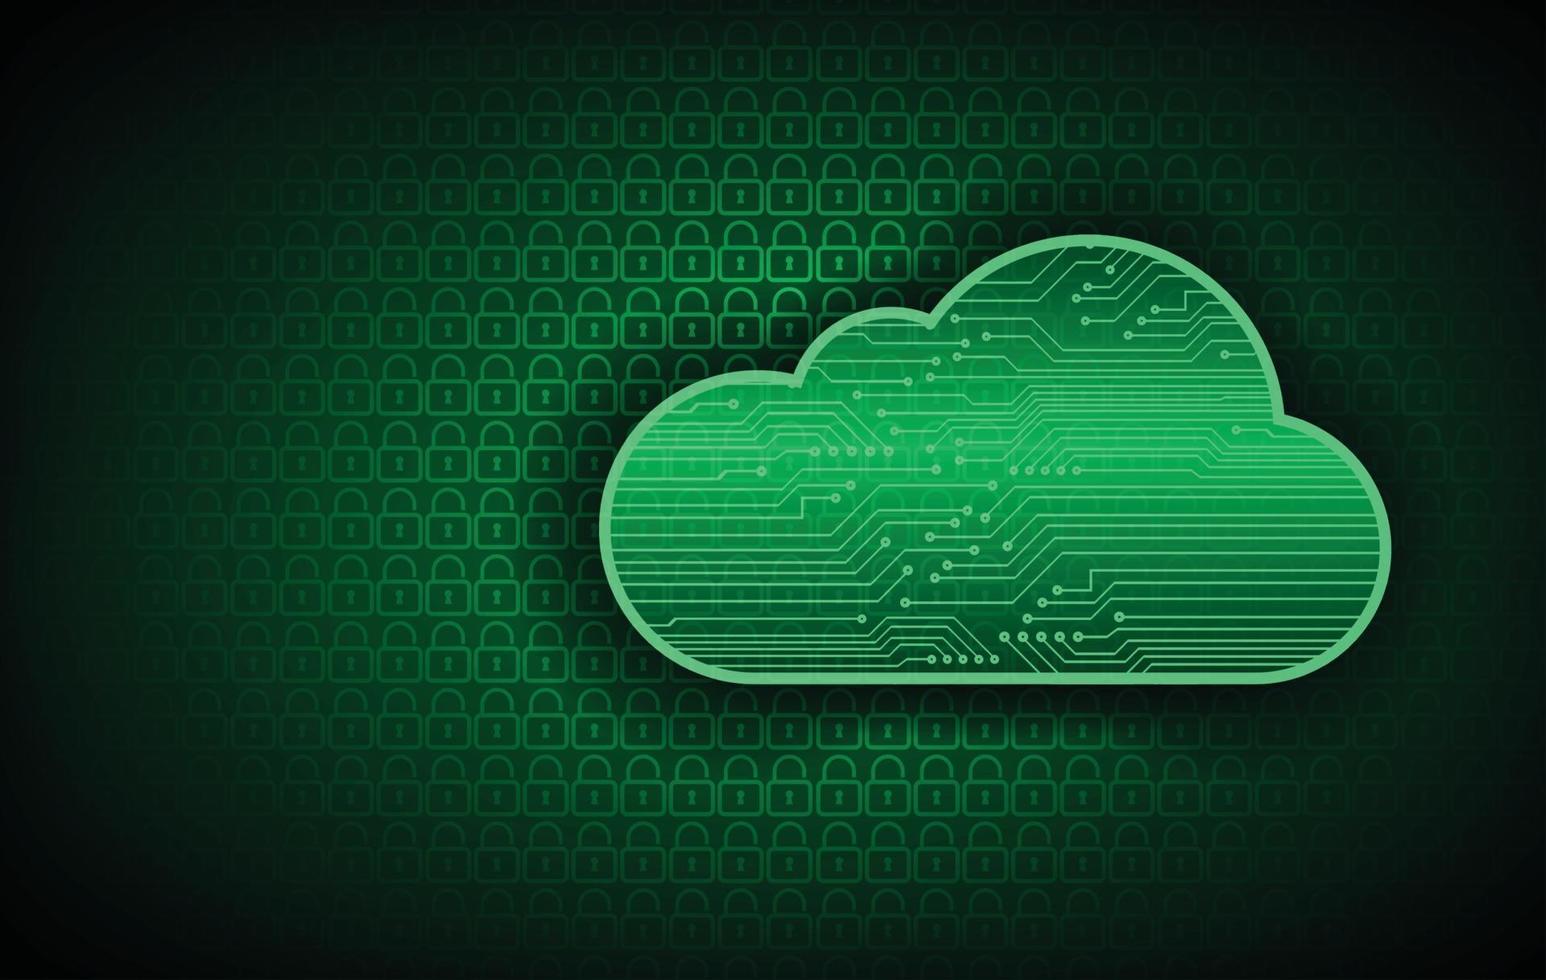 cloud computing cyber circuit future technology concept background vector